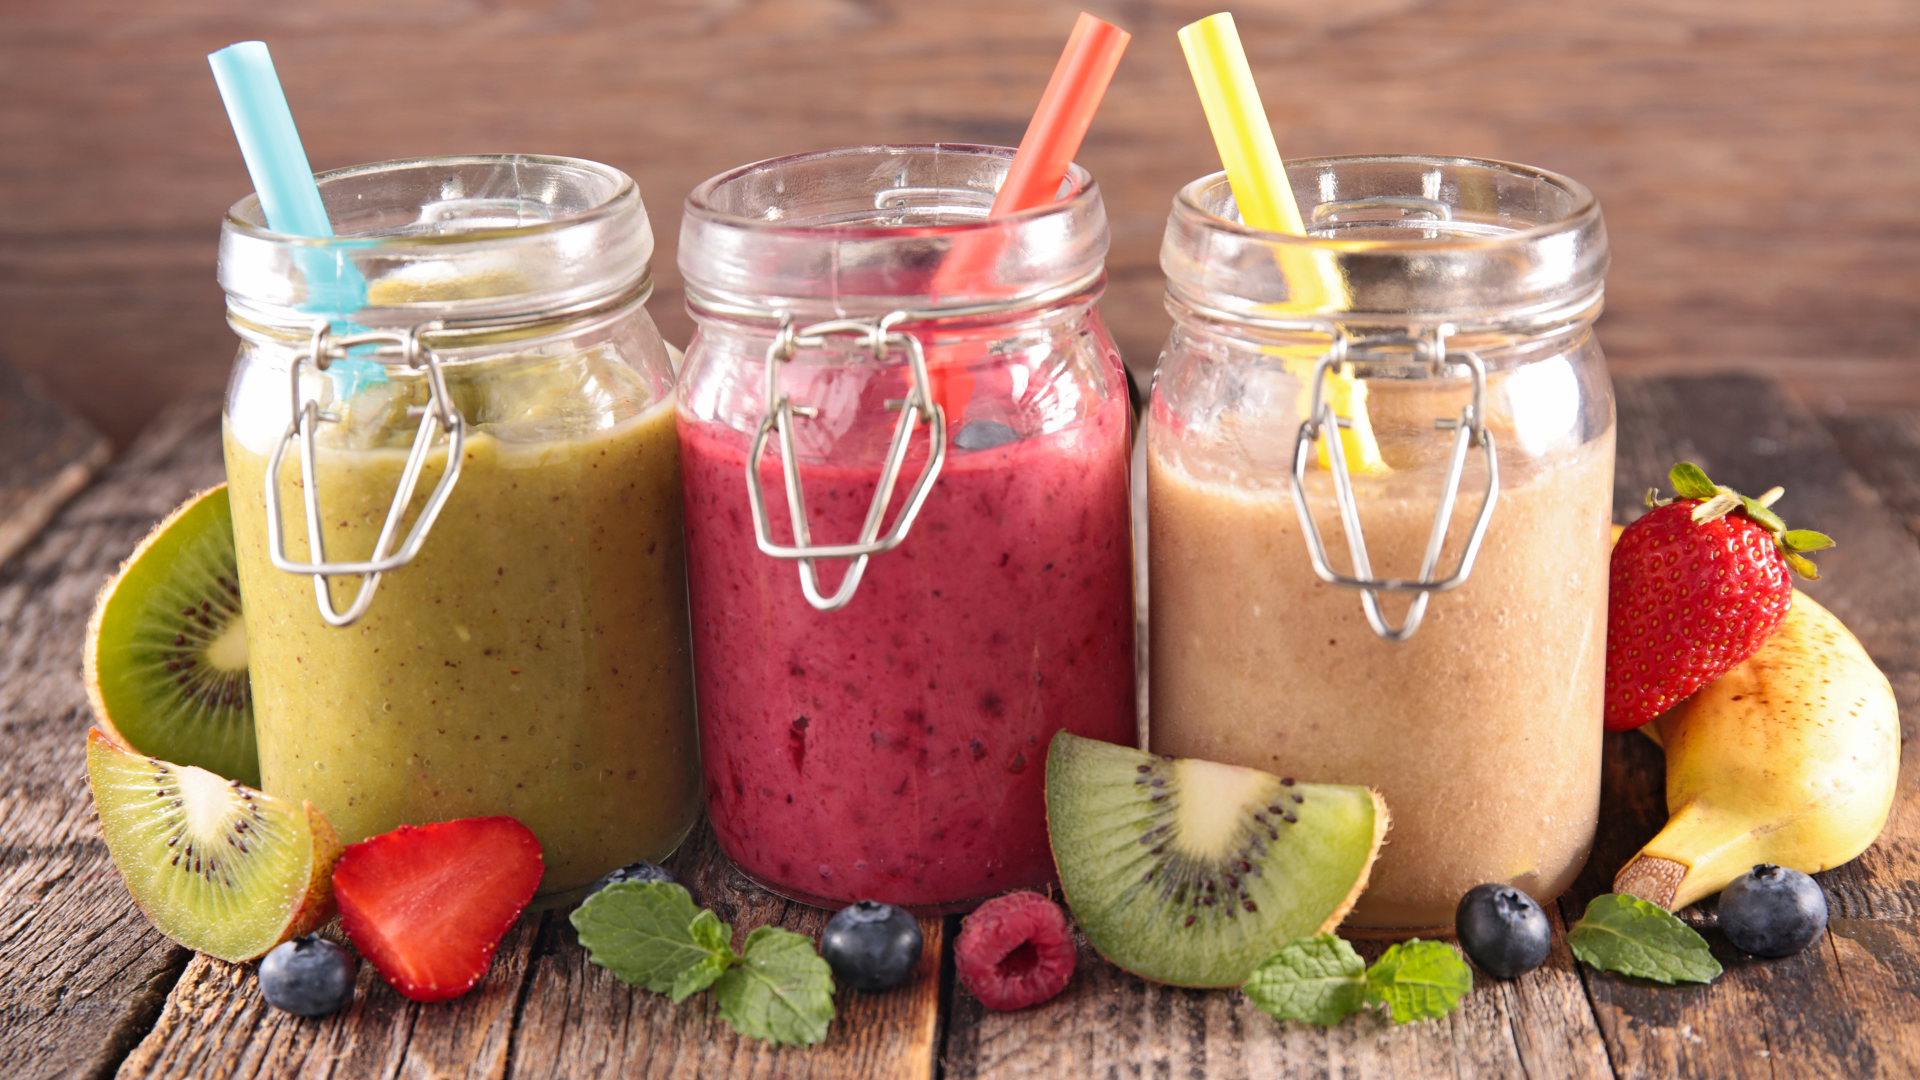 10 Best Smoothie Recipes That Will Elevate Your Health and Taste Buds